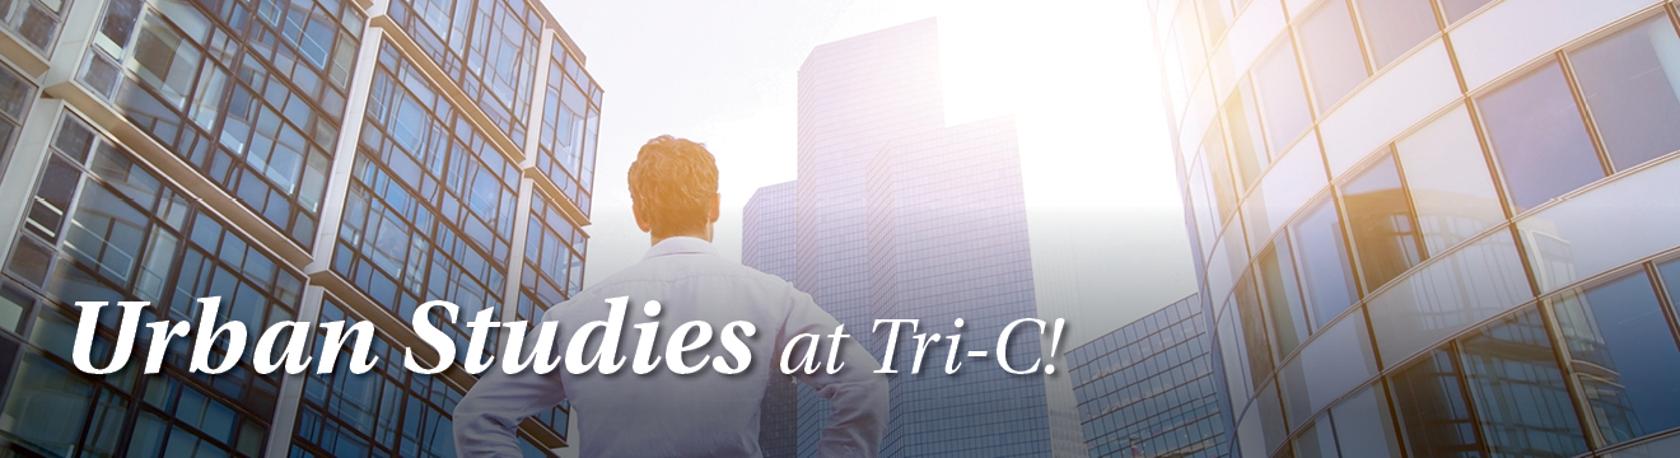 "Urban Studies at Tri-C!" with image of person looking up at a city skyline.